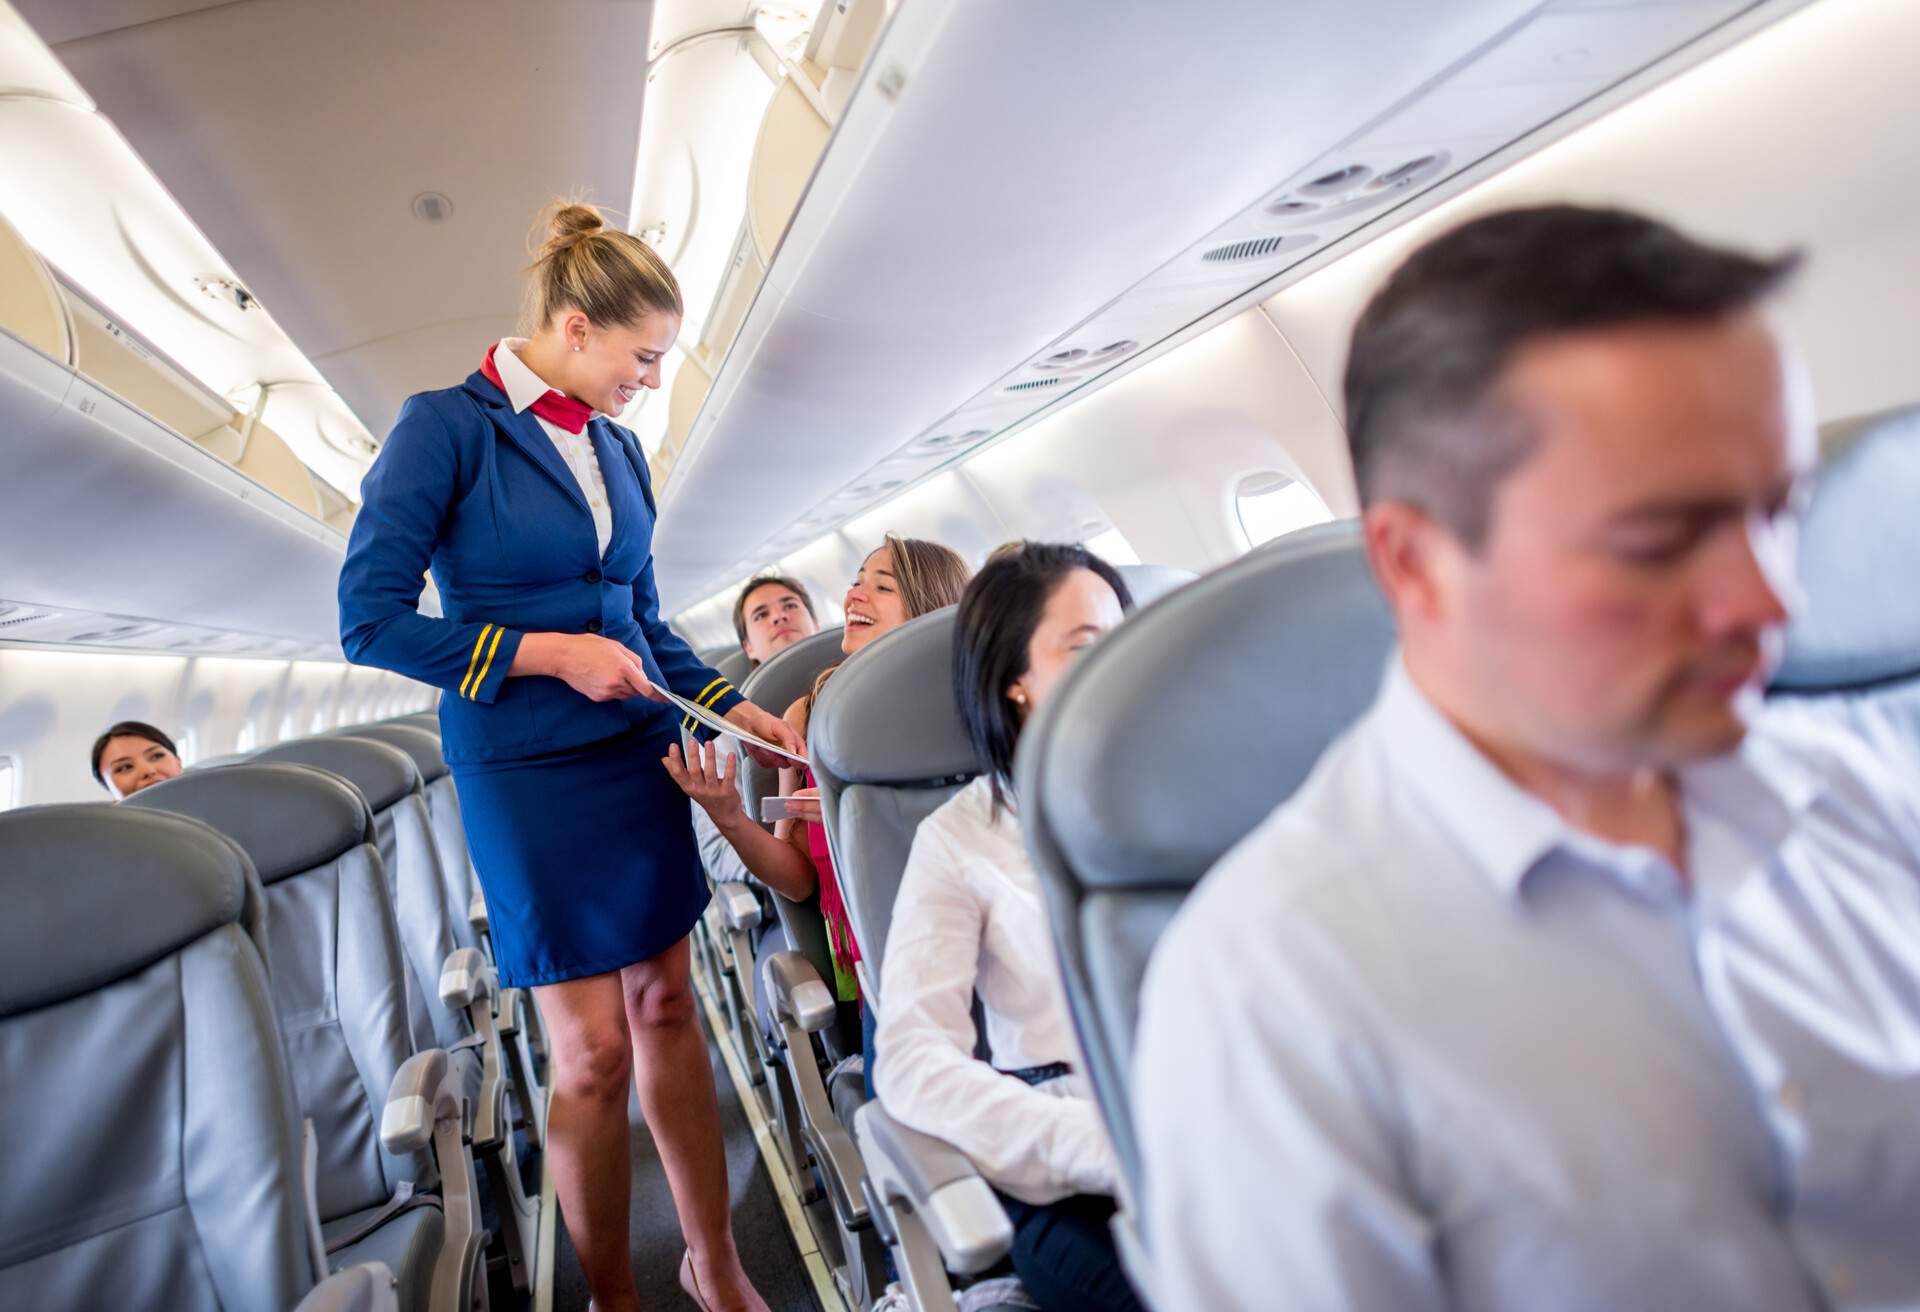 A friendly flight attendant attentively shows a list to a passenger, assisting them with care and professionalism.